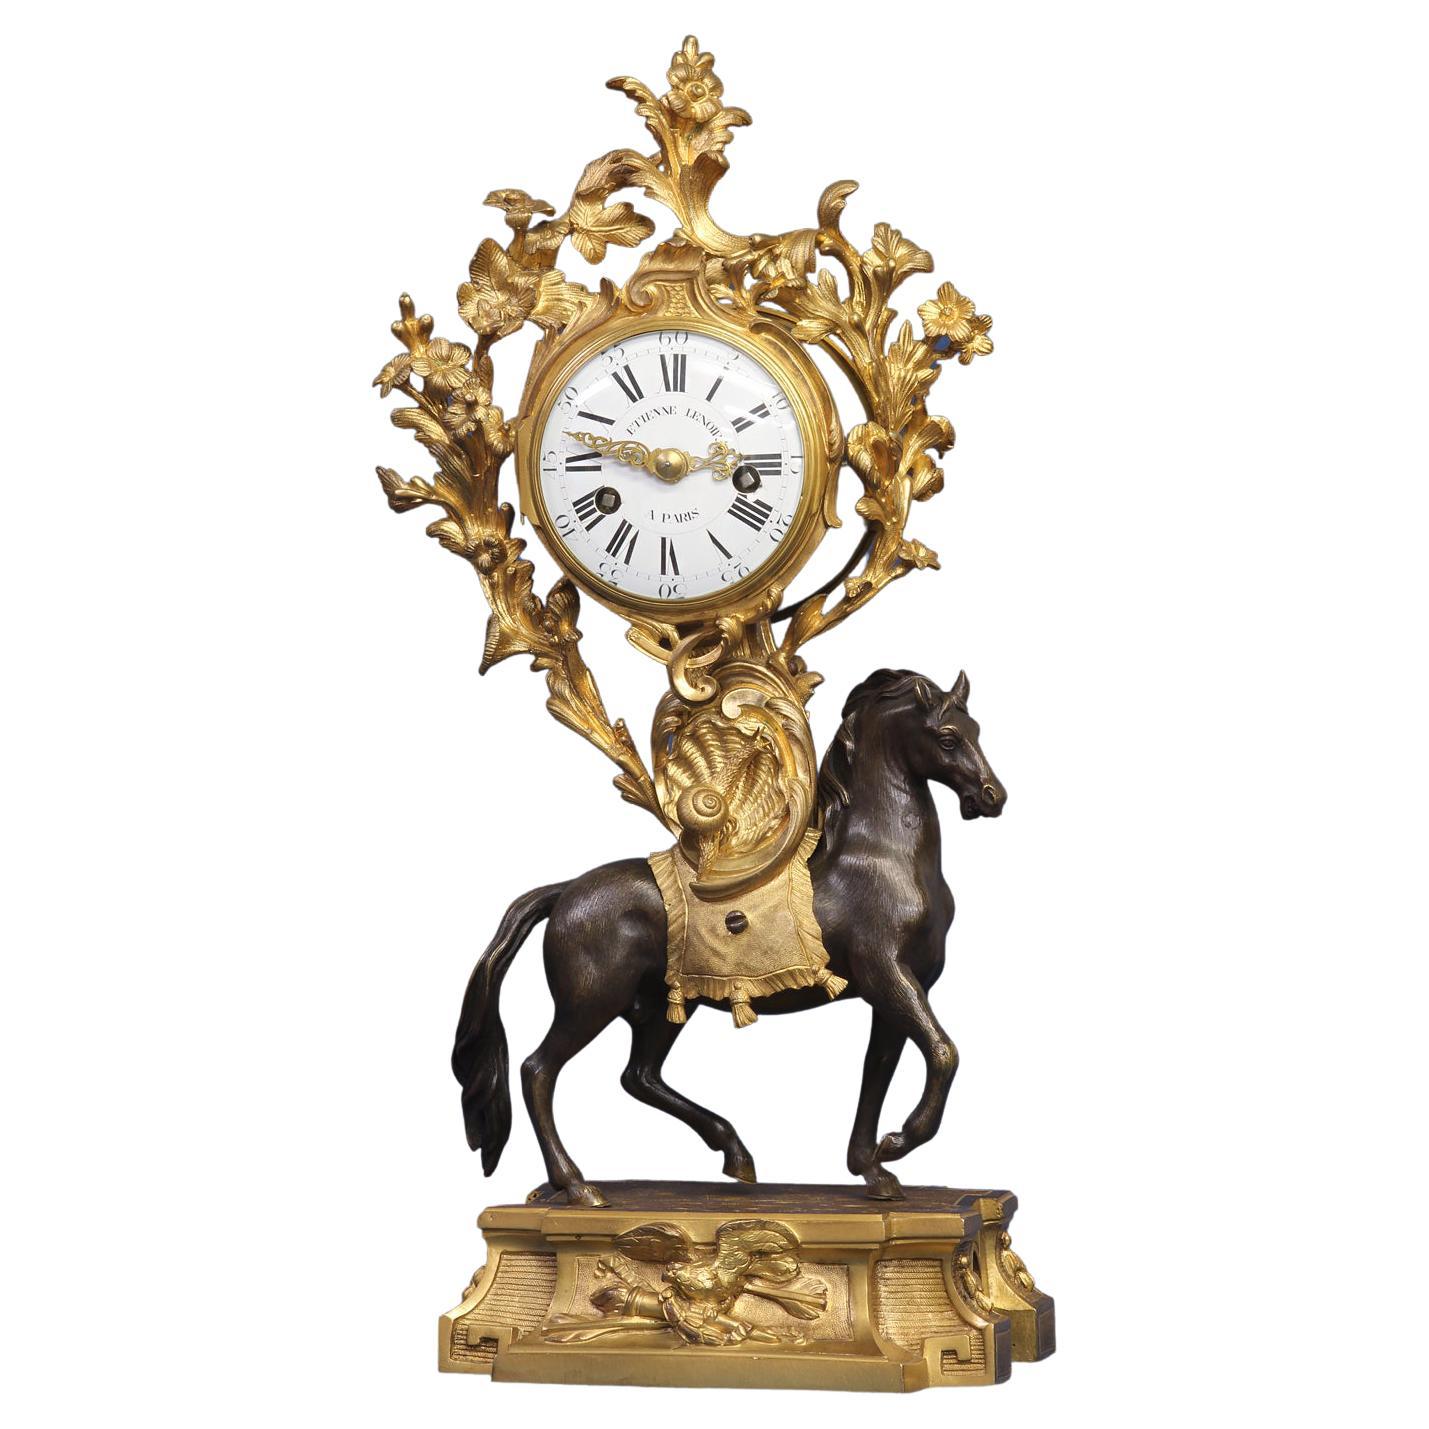 c.1765 Ormolu and Patinated Horse Clock by Lenoir For Sale